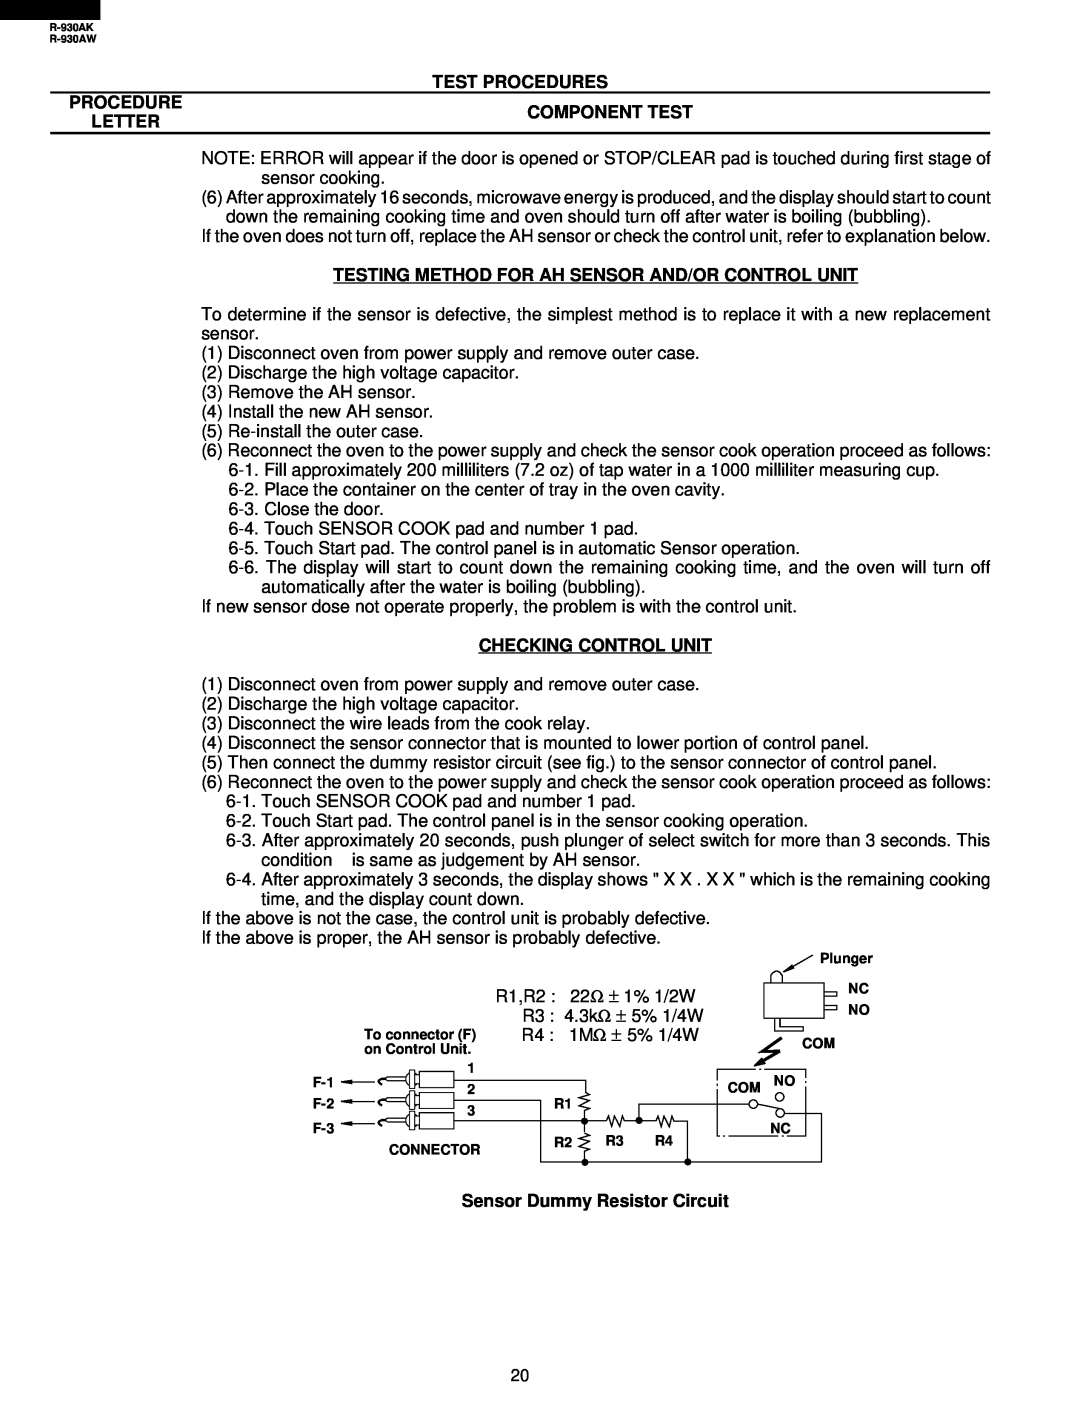 Sharp R-930AW Test Procedures Procedure, Letter, Component Test, Testing Method For Ah Sensor And/Or Control Unit, 1% 1/2W 